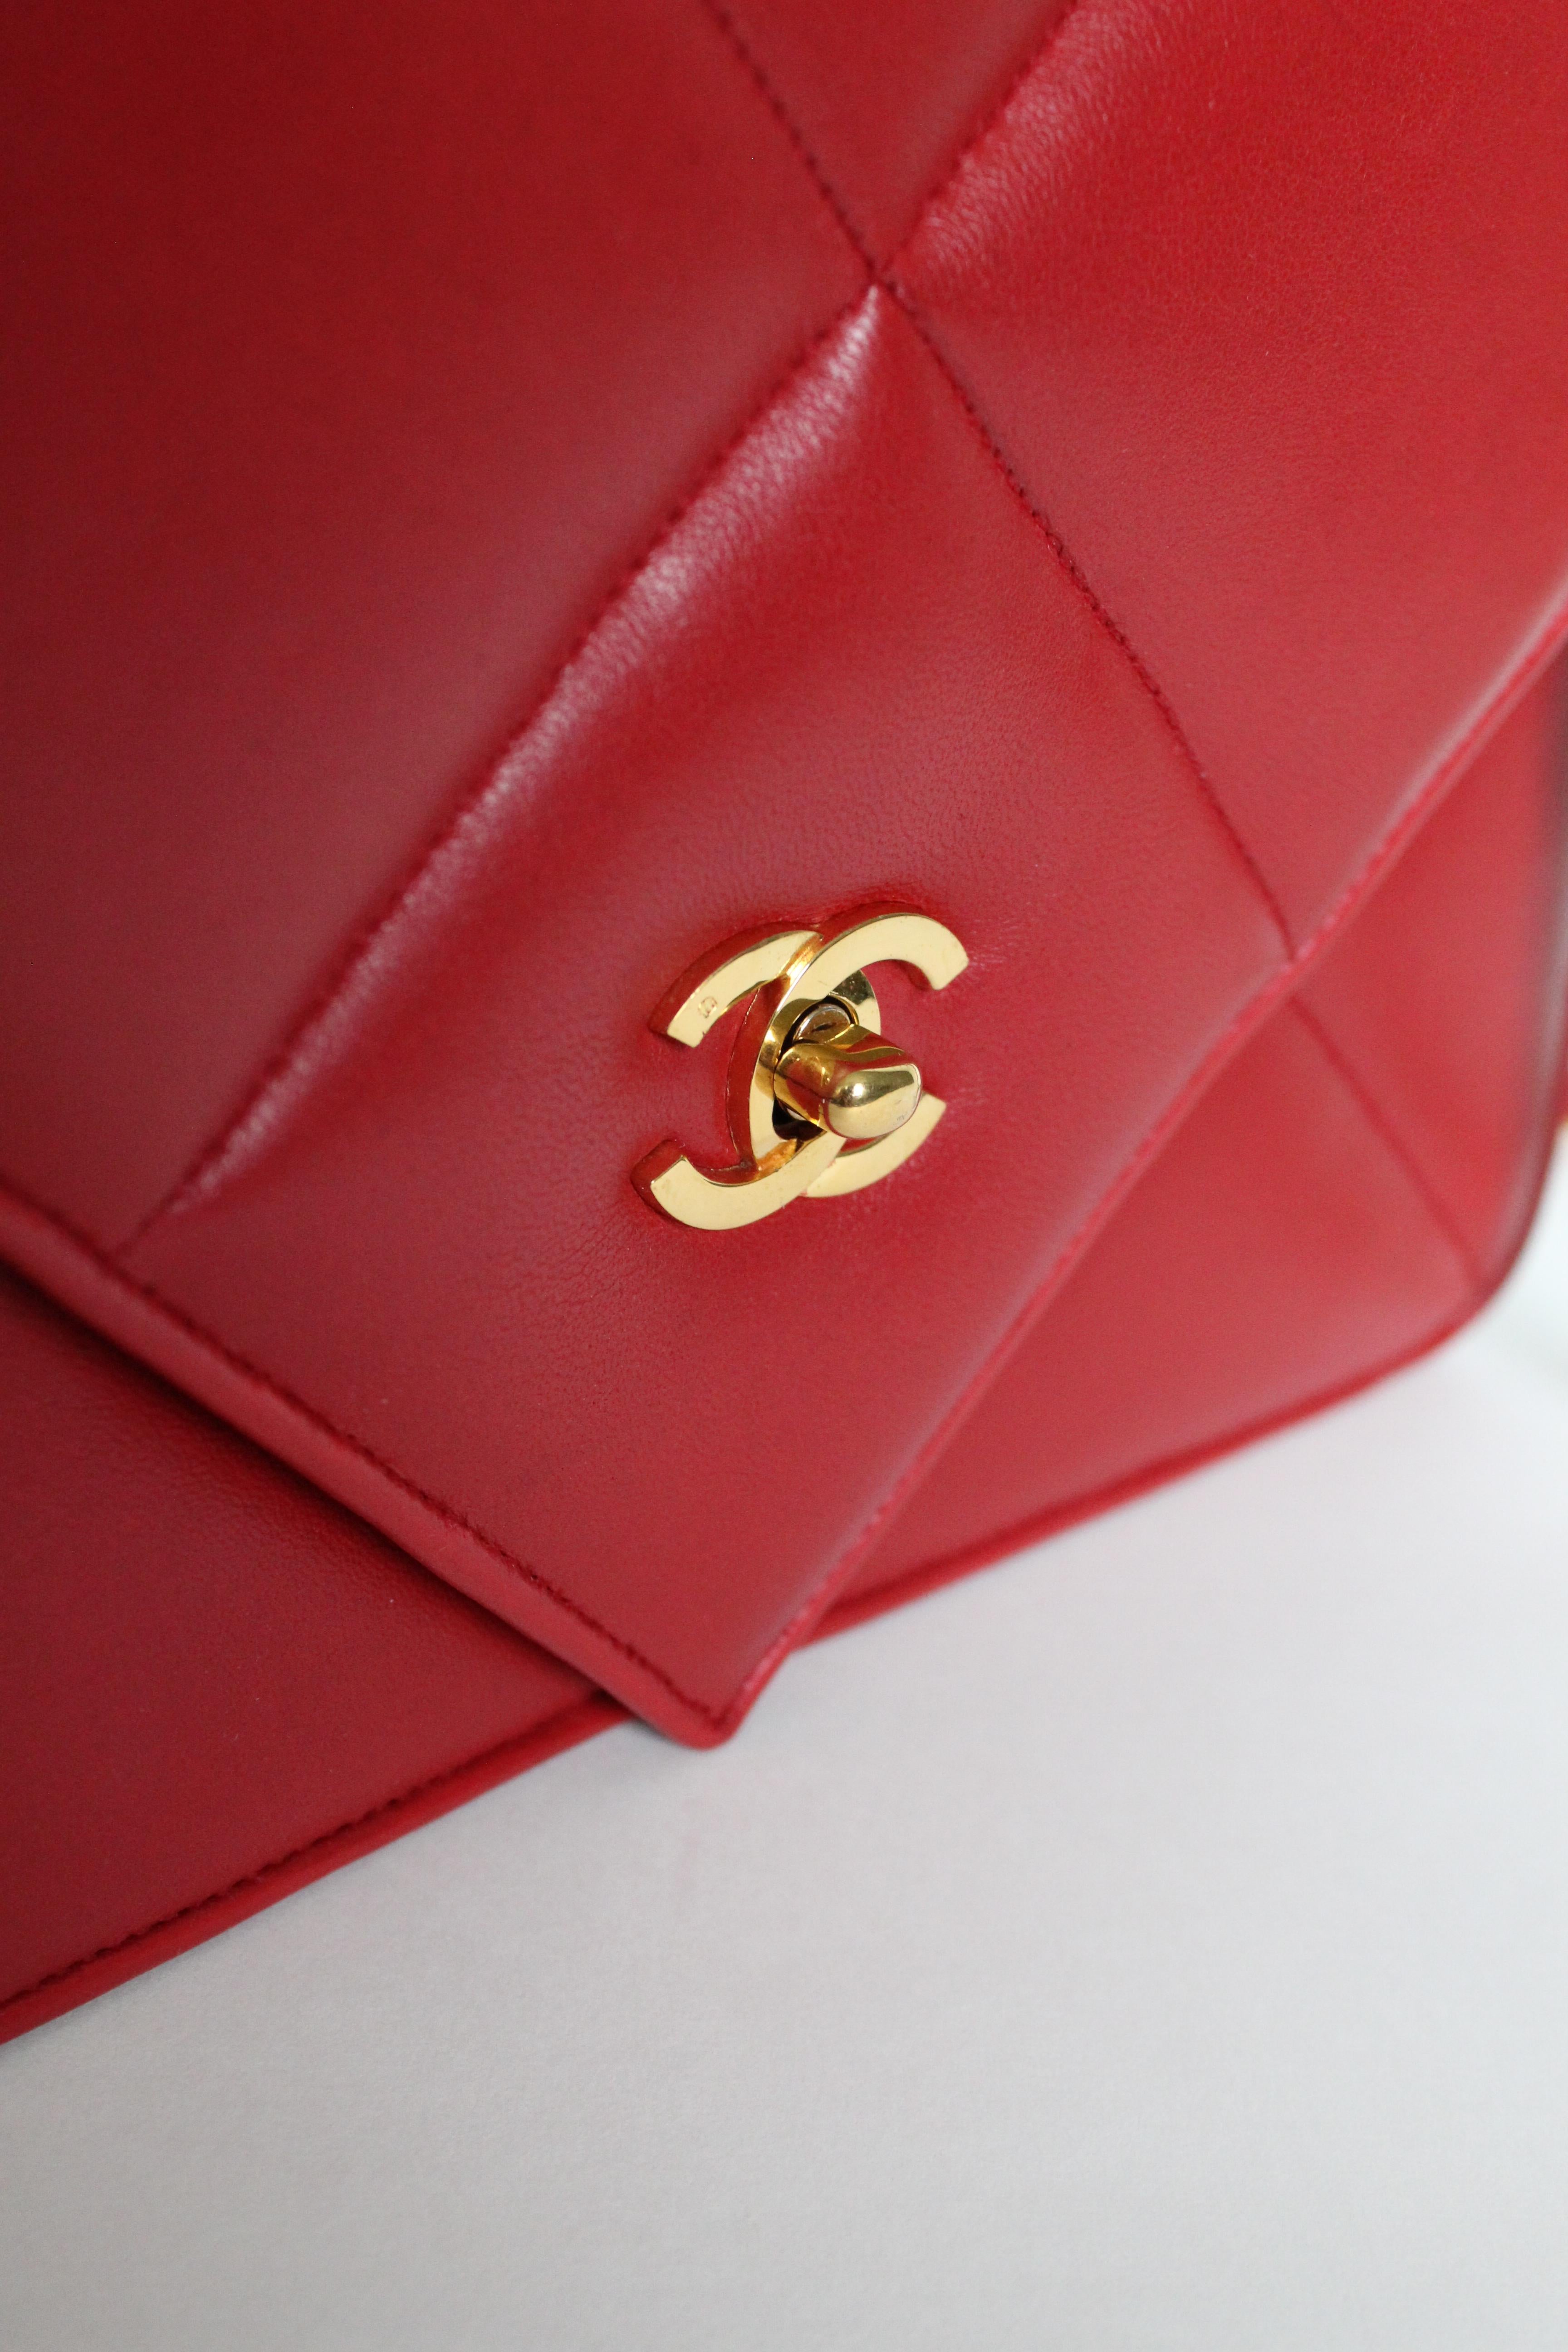 Classic Chanel 19 Vintage Rare 90s Jumbo Lambskin Red Envelope Flap Bag  In Good Condition For Sale In Miami, FL